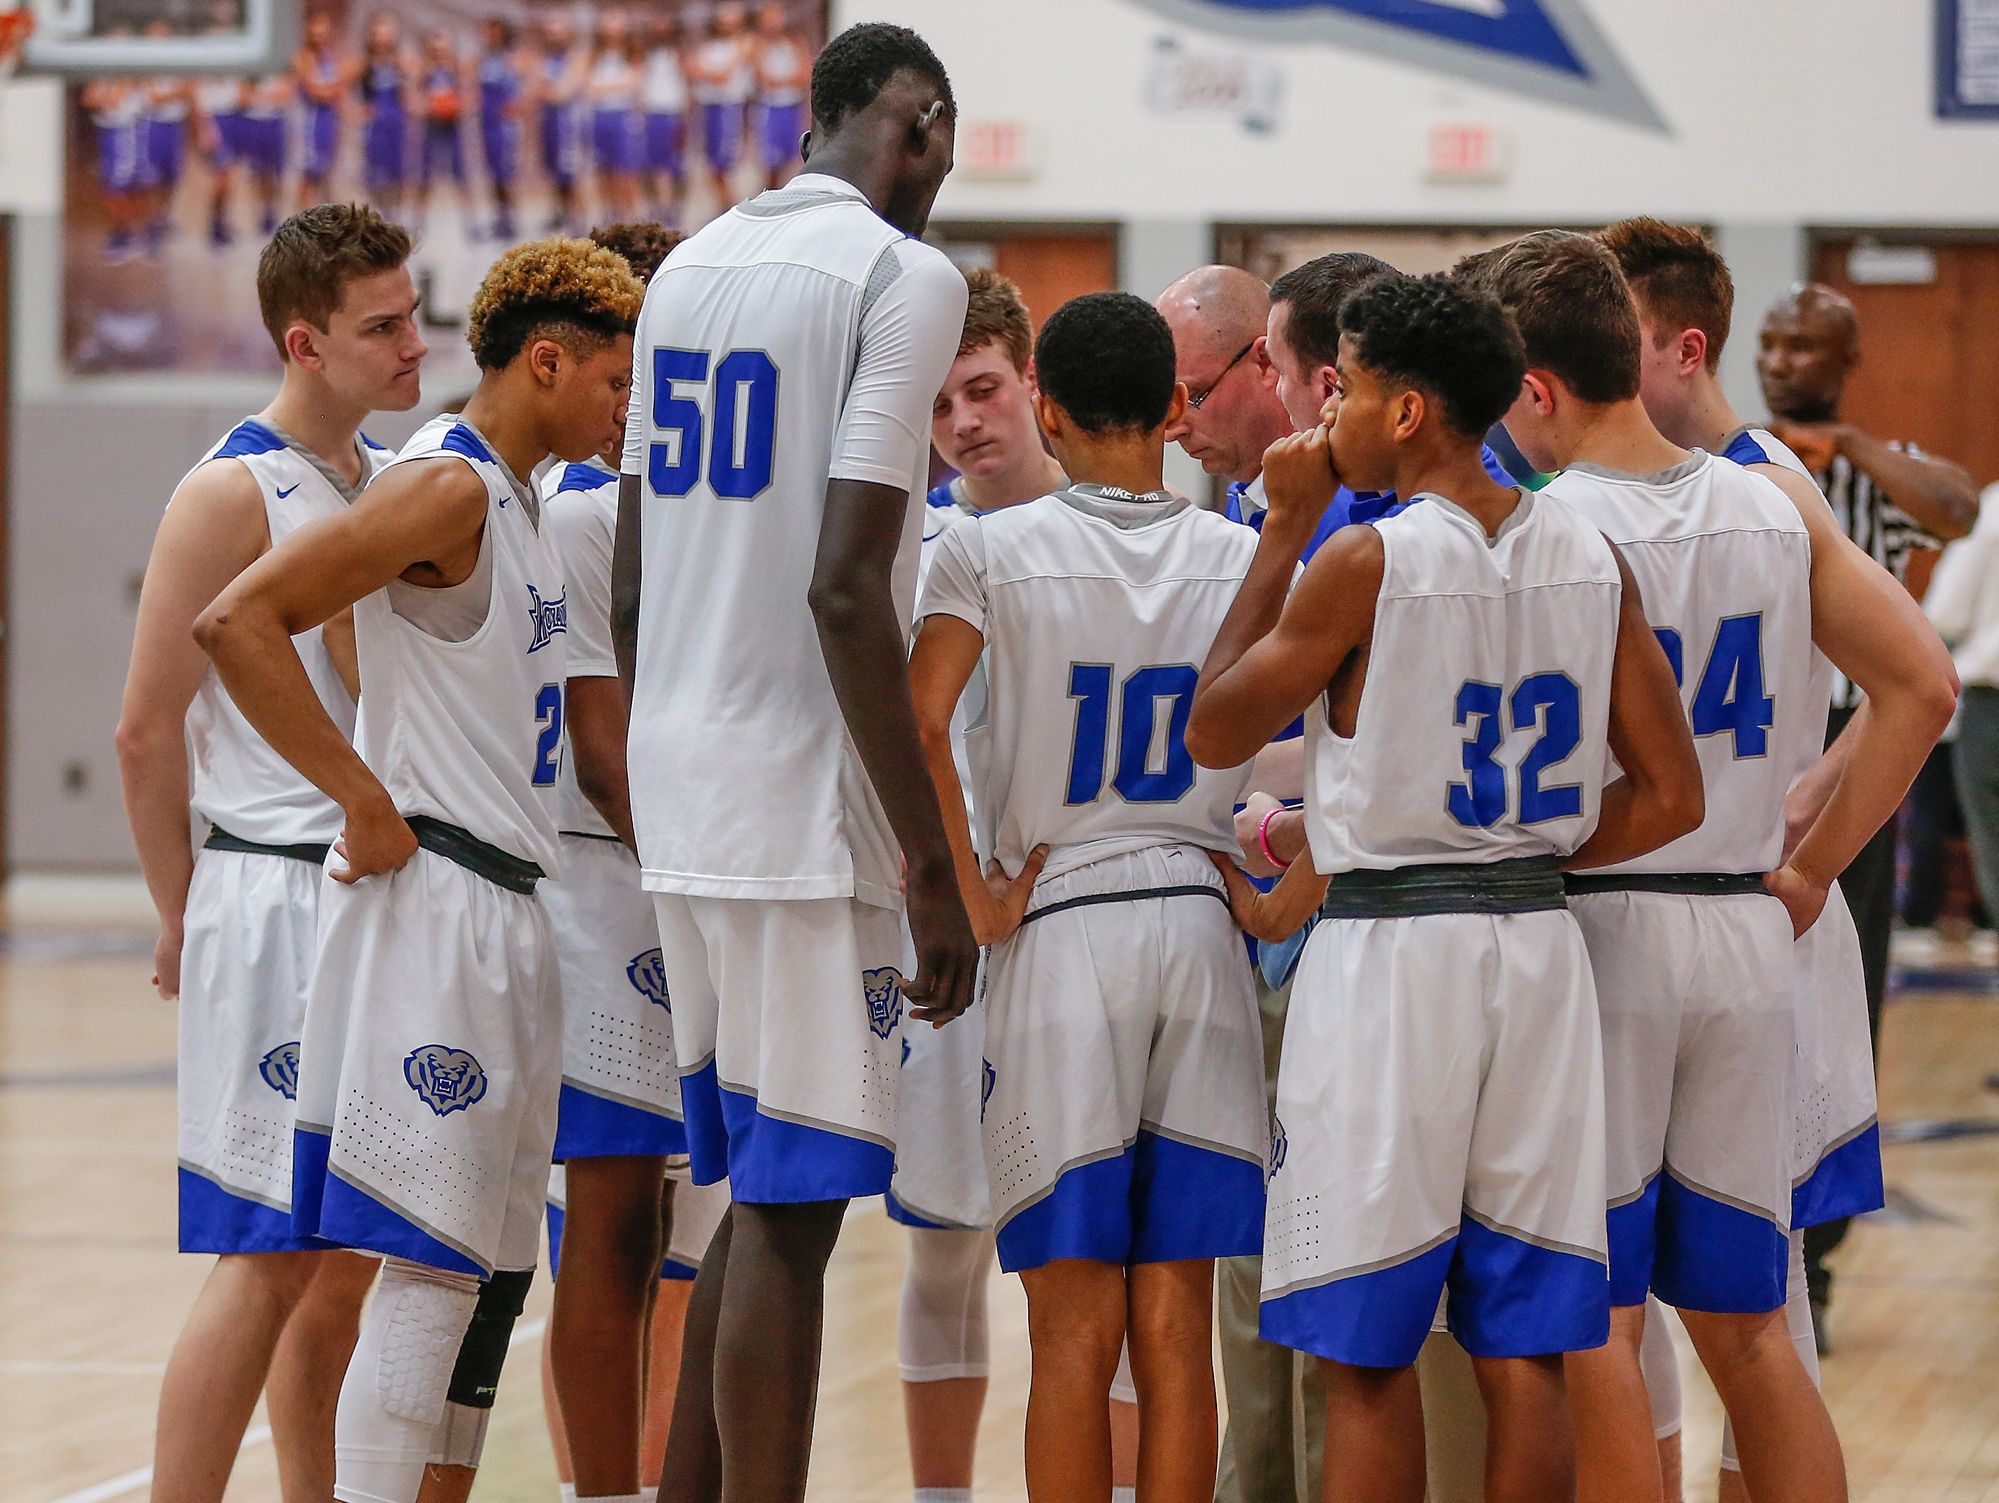 Hamilton Southeastern Royals center Mabor Majak (50) towers over his junior varsity teammates in a huddle just before tip-off against the New Castle Trojans on Tuesday, Feb. 7, 2017. Majak is freshman and stands 7 feet 1 inch tall.